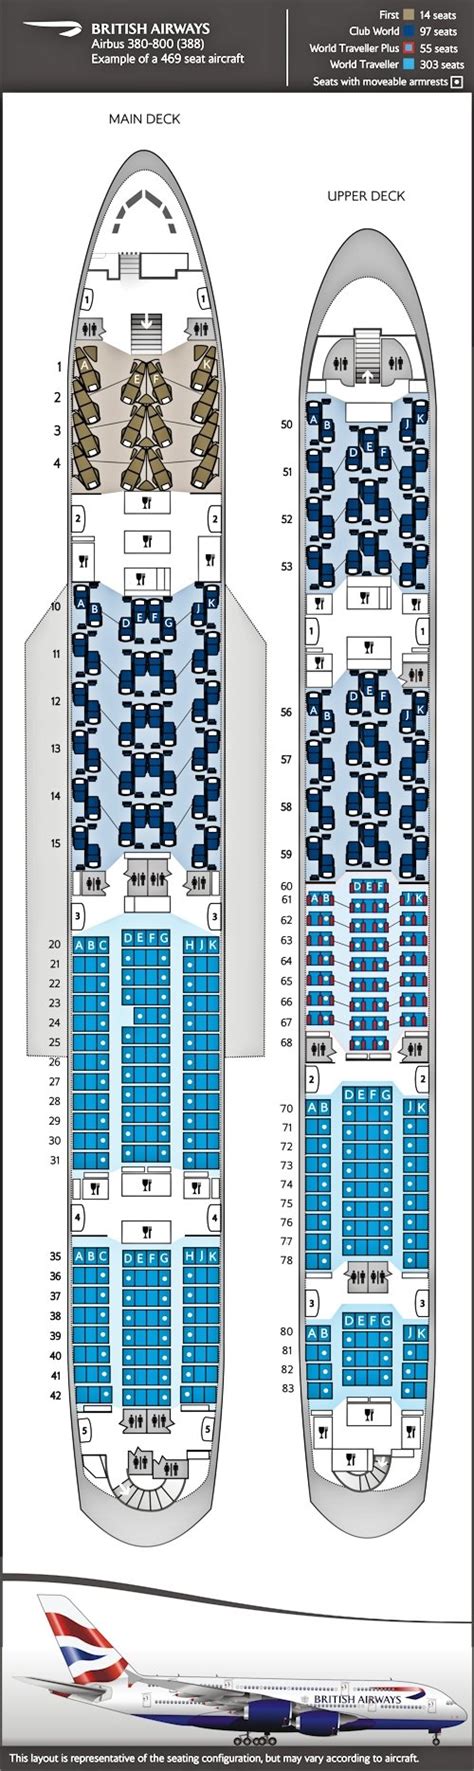 Ba plane seat plan. First seat maps. This is our first class, available on selected long haul flights. These maps are representative of seating layouts on board, but may vary according to aircraft. Once you have made a booking, you can see the actual seating layout for your flight and choose a seat using Manage My Booking. If you’d like to discuss your seating ... 